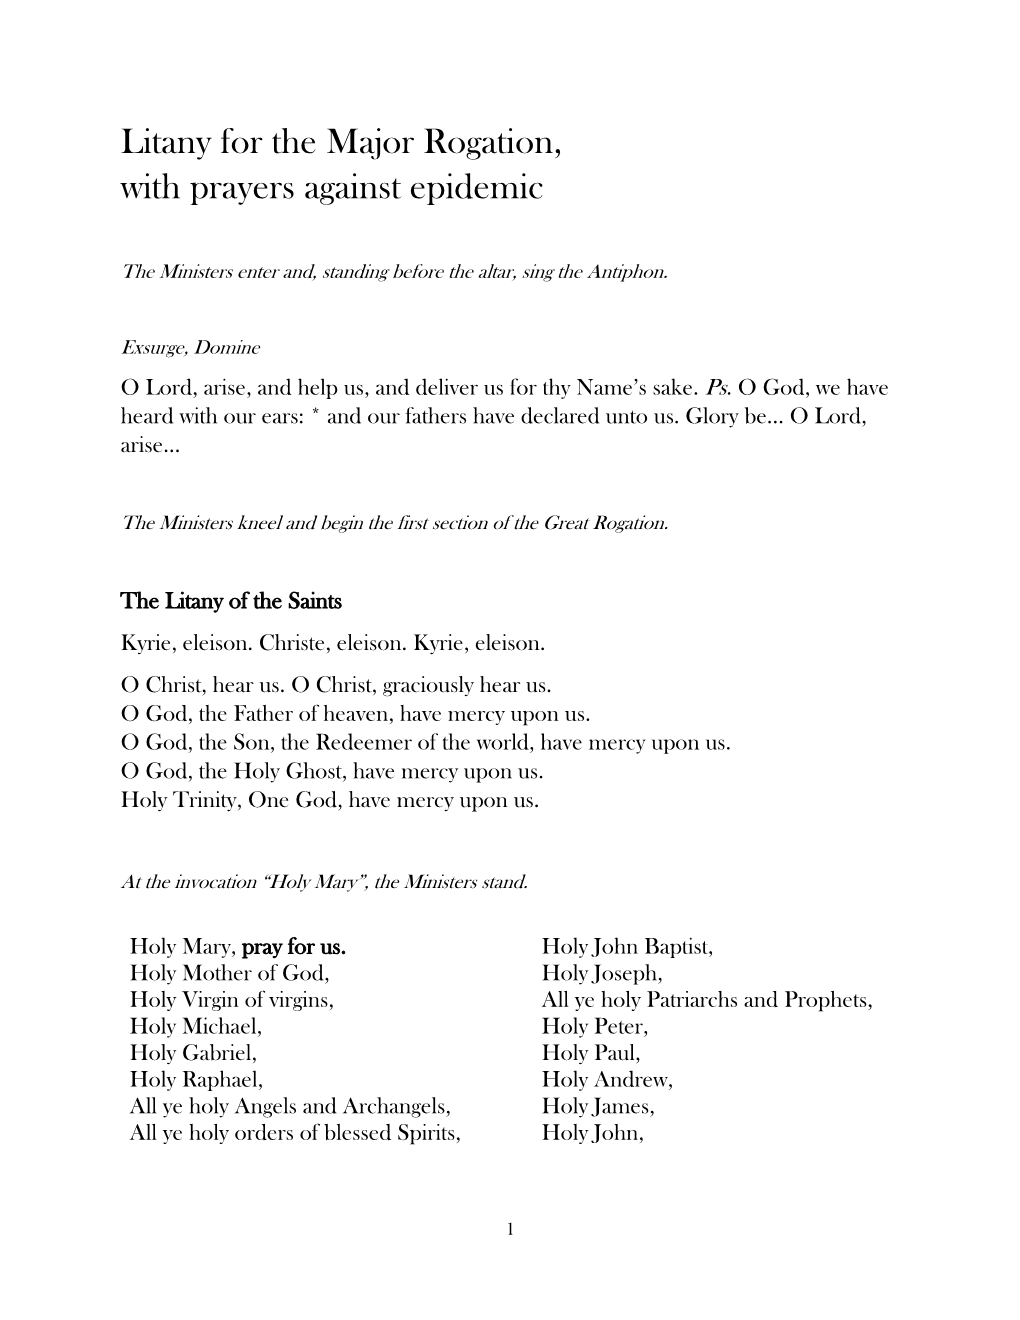 Litany for the Major Rogation, with Prayers Against Epidemic